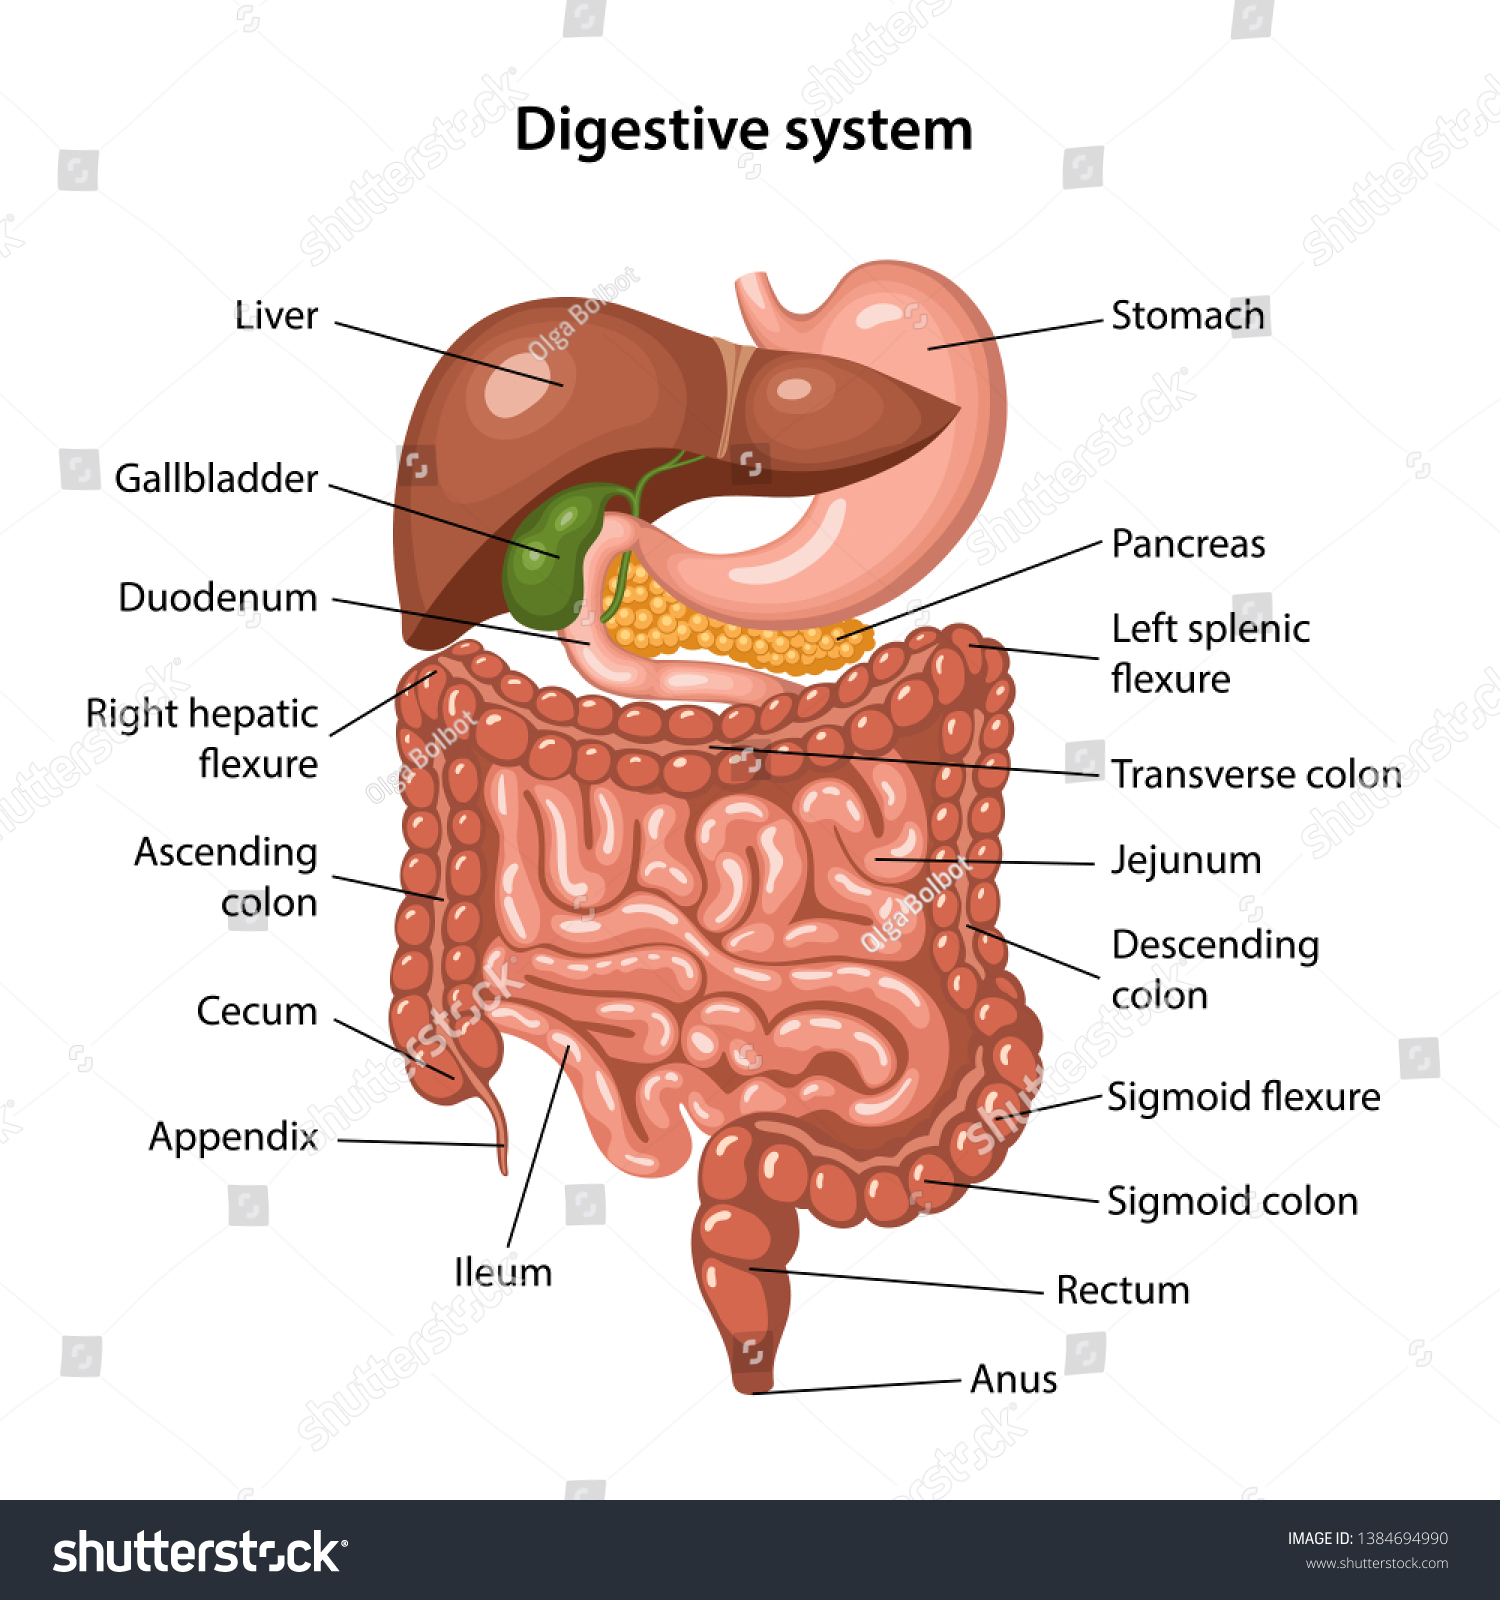 Anatomy of the human digestive system with description of the corresponding internal parts. Anatomical vector illustration in flat style isolated over white background. #1384694990